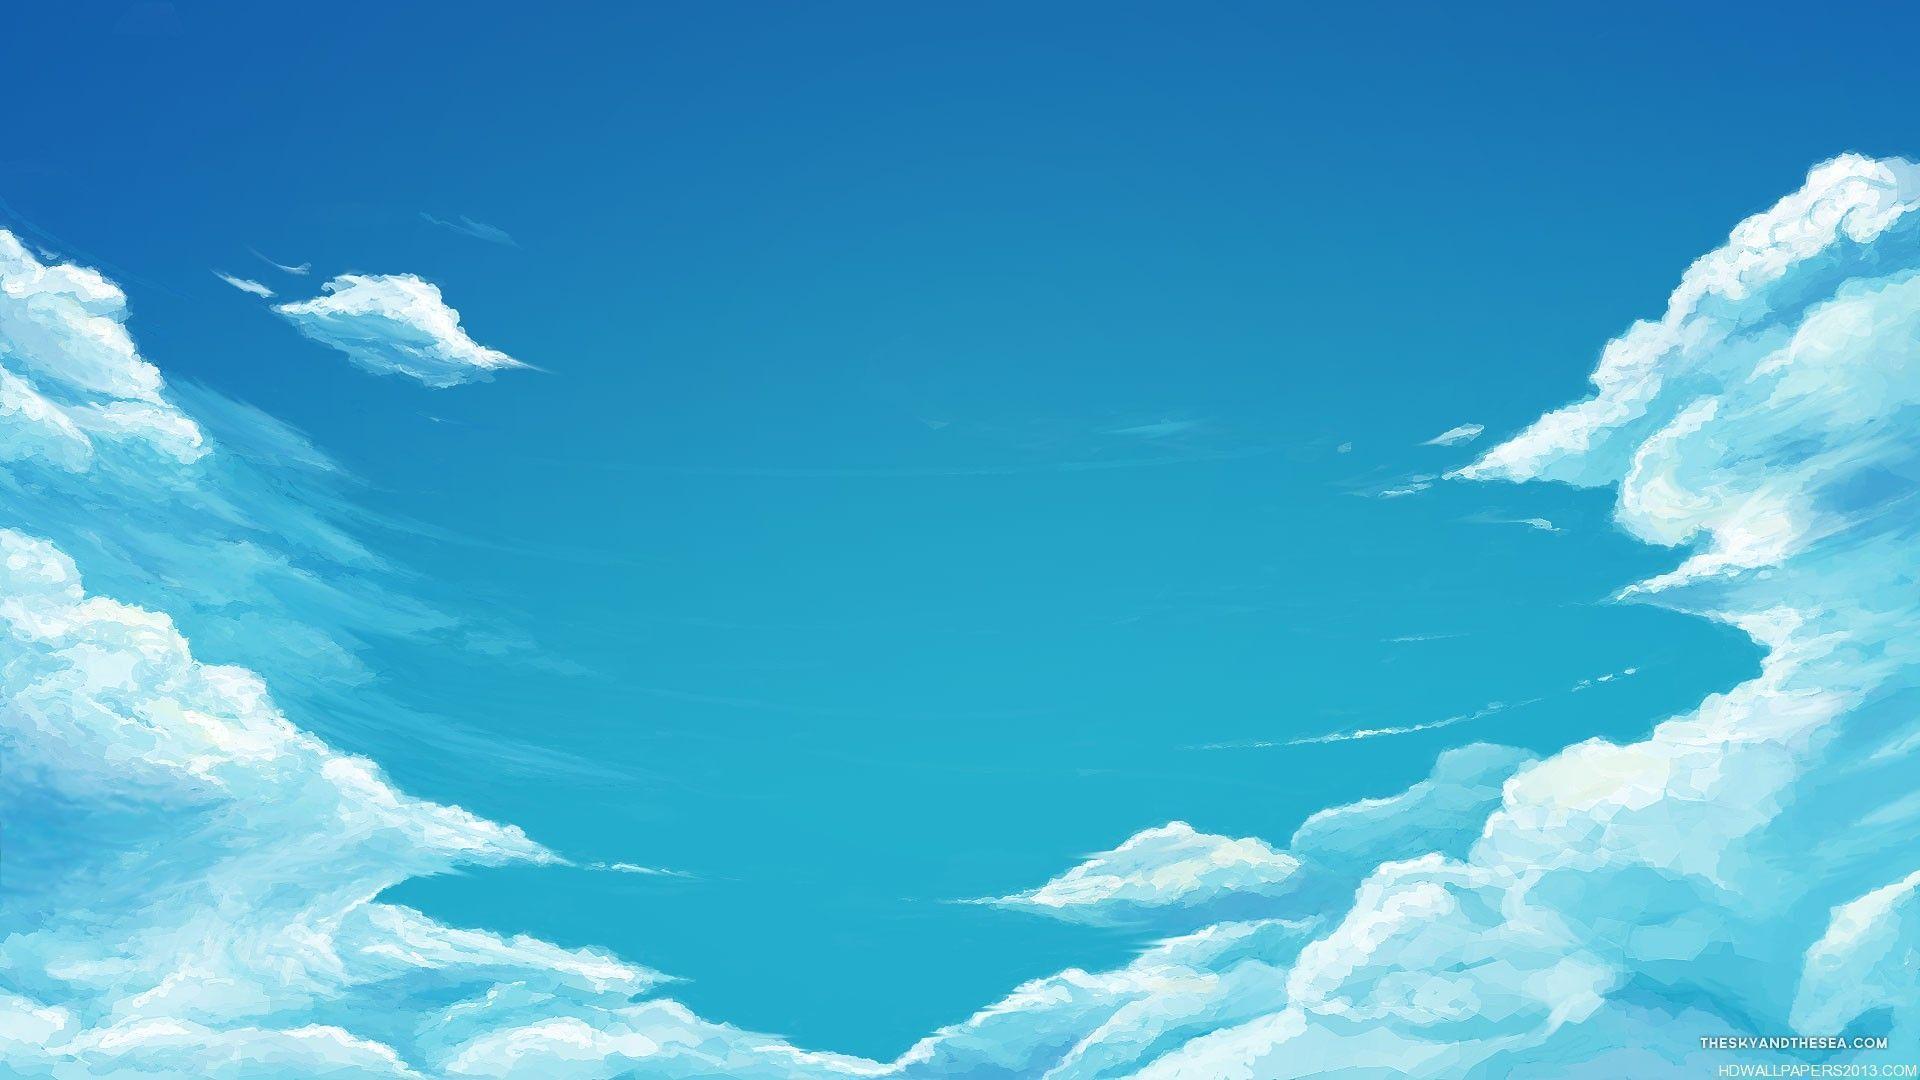 Clean Blue Sky Wallpaper 42942 High Resolution. download all free